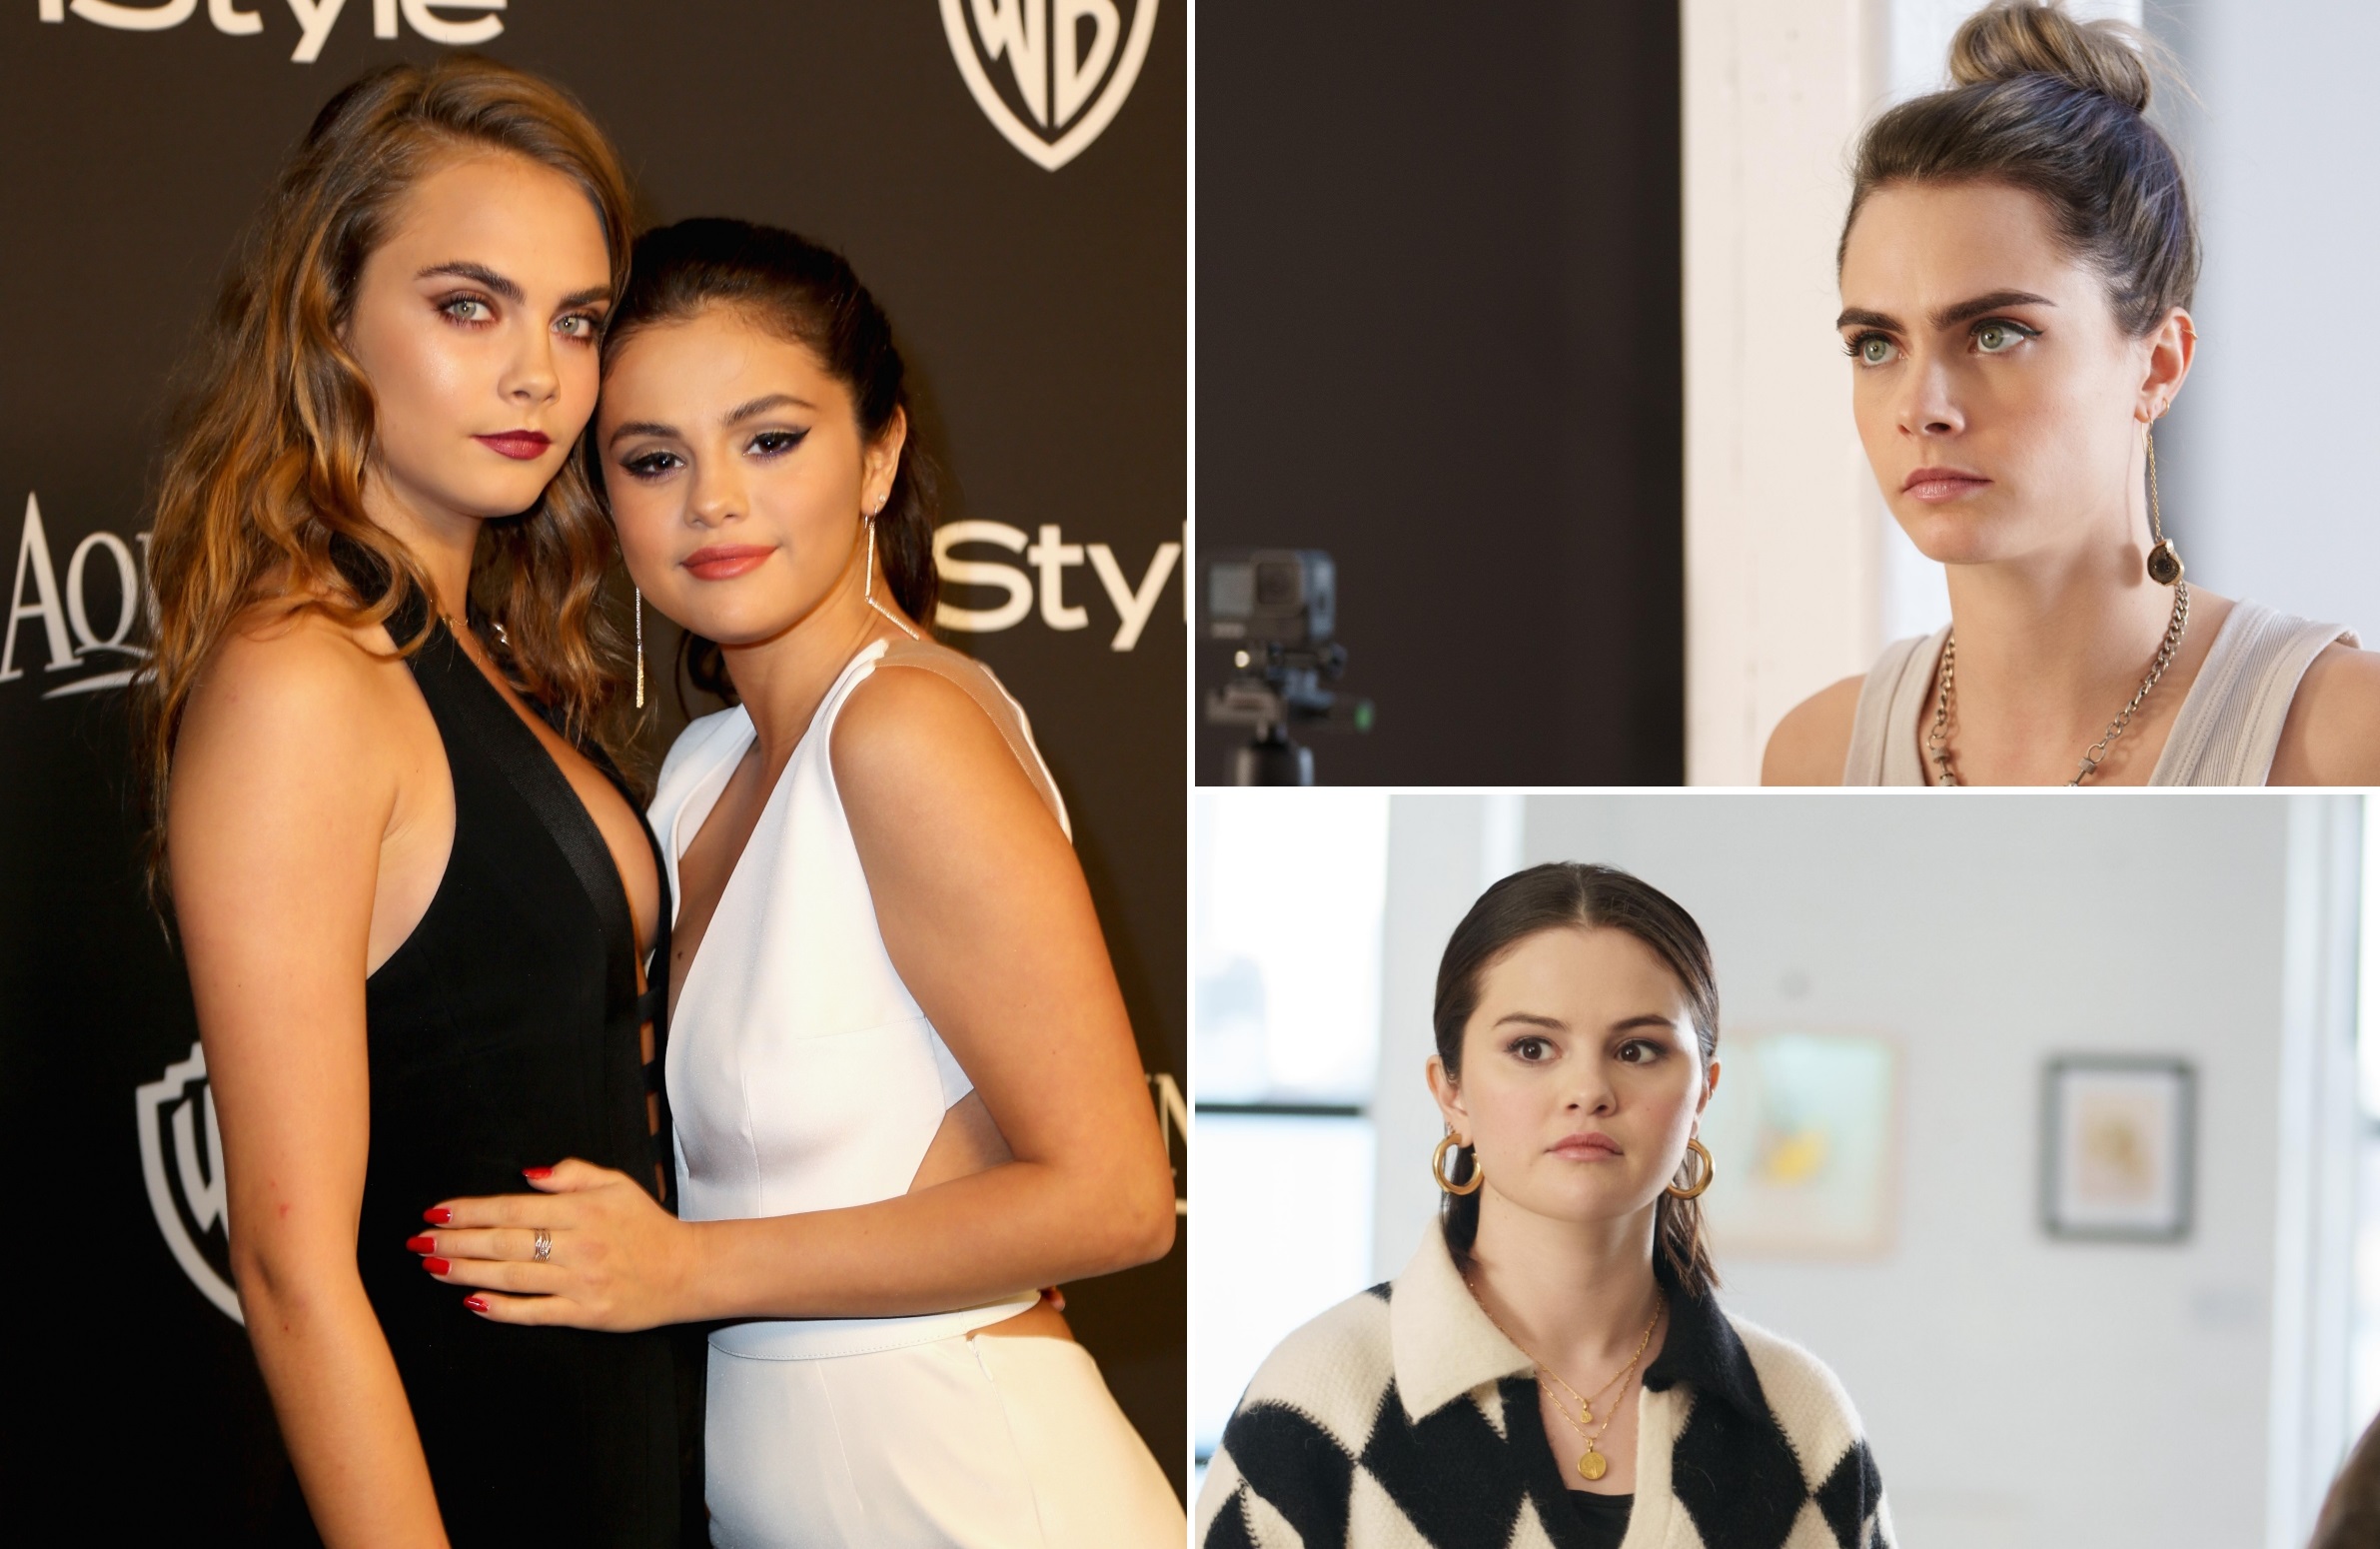 You are currently viewing Selena Gomez, Cara Delevingne’s Onscreen Kiss Slammed